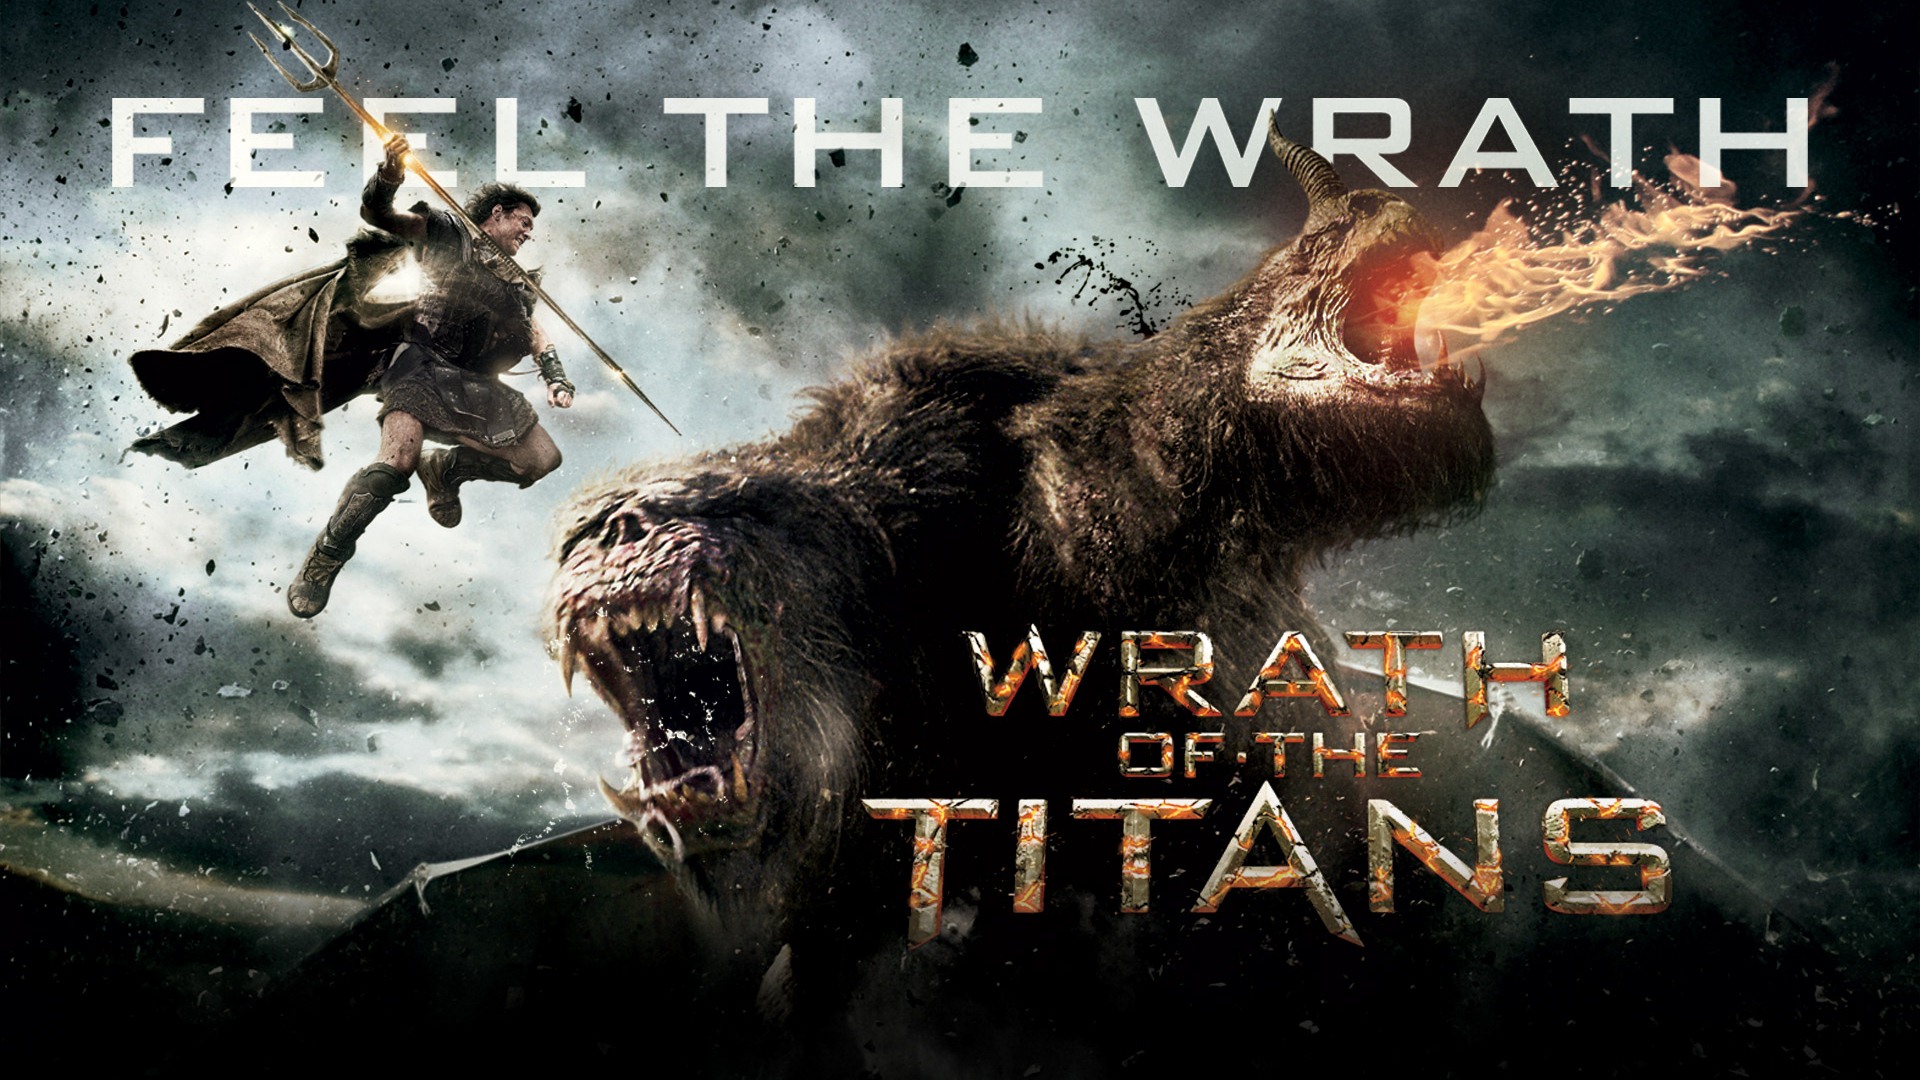 Wrath of the Titans HD wallpapers #1 - 1920x1080